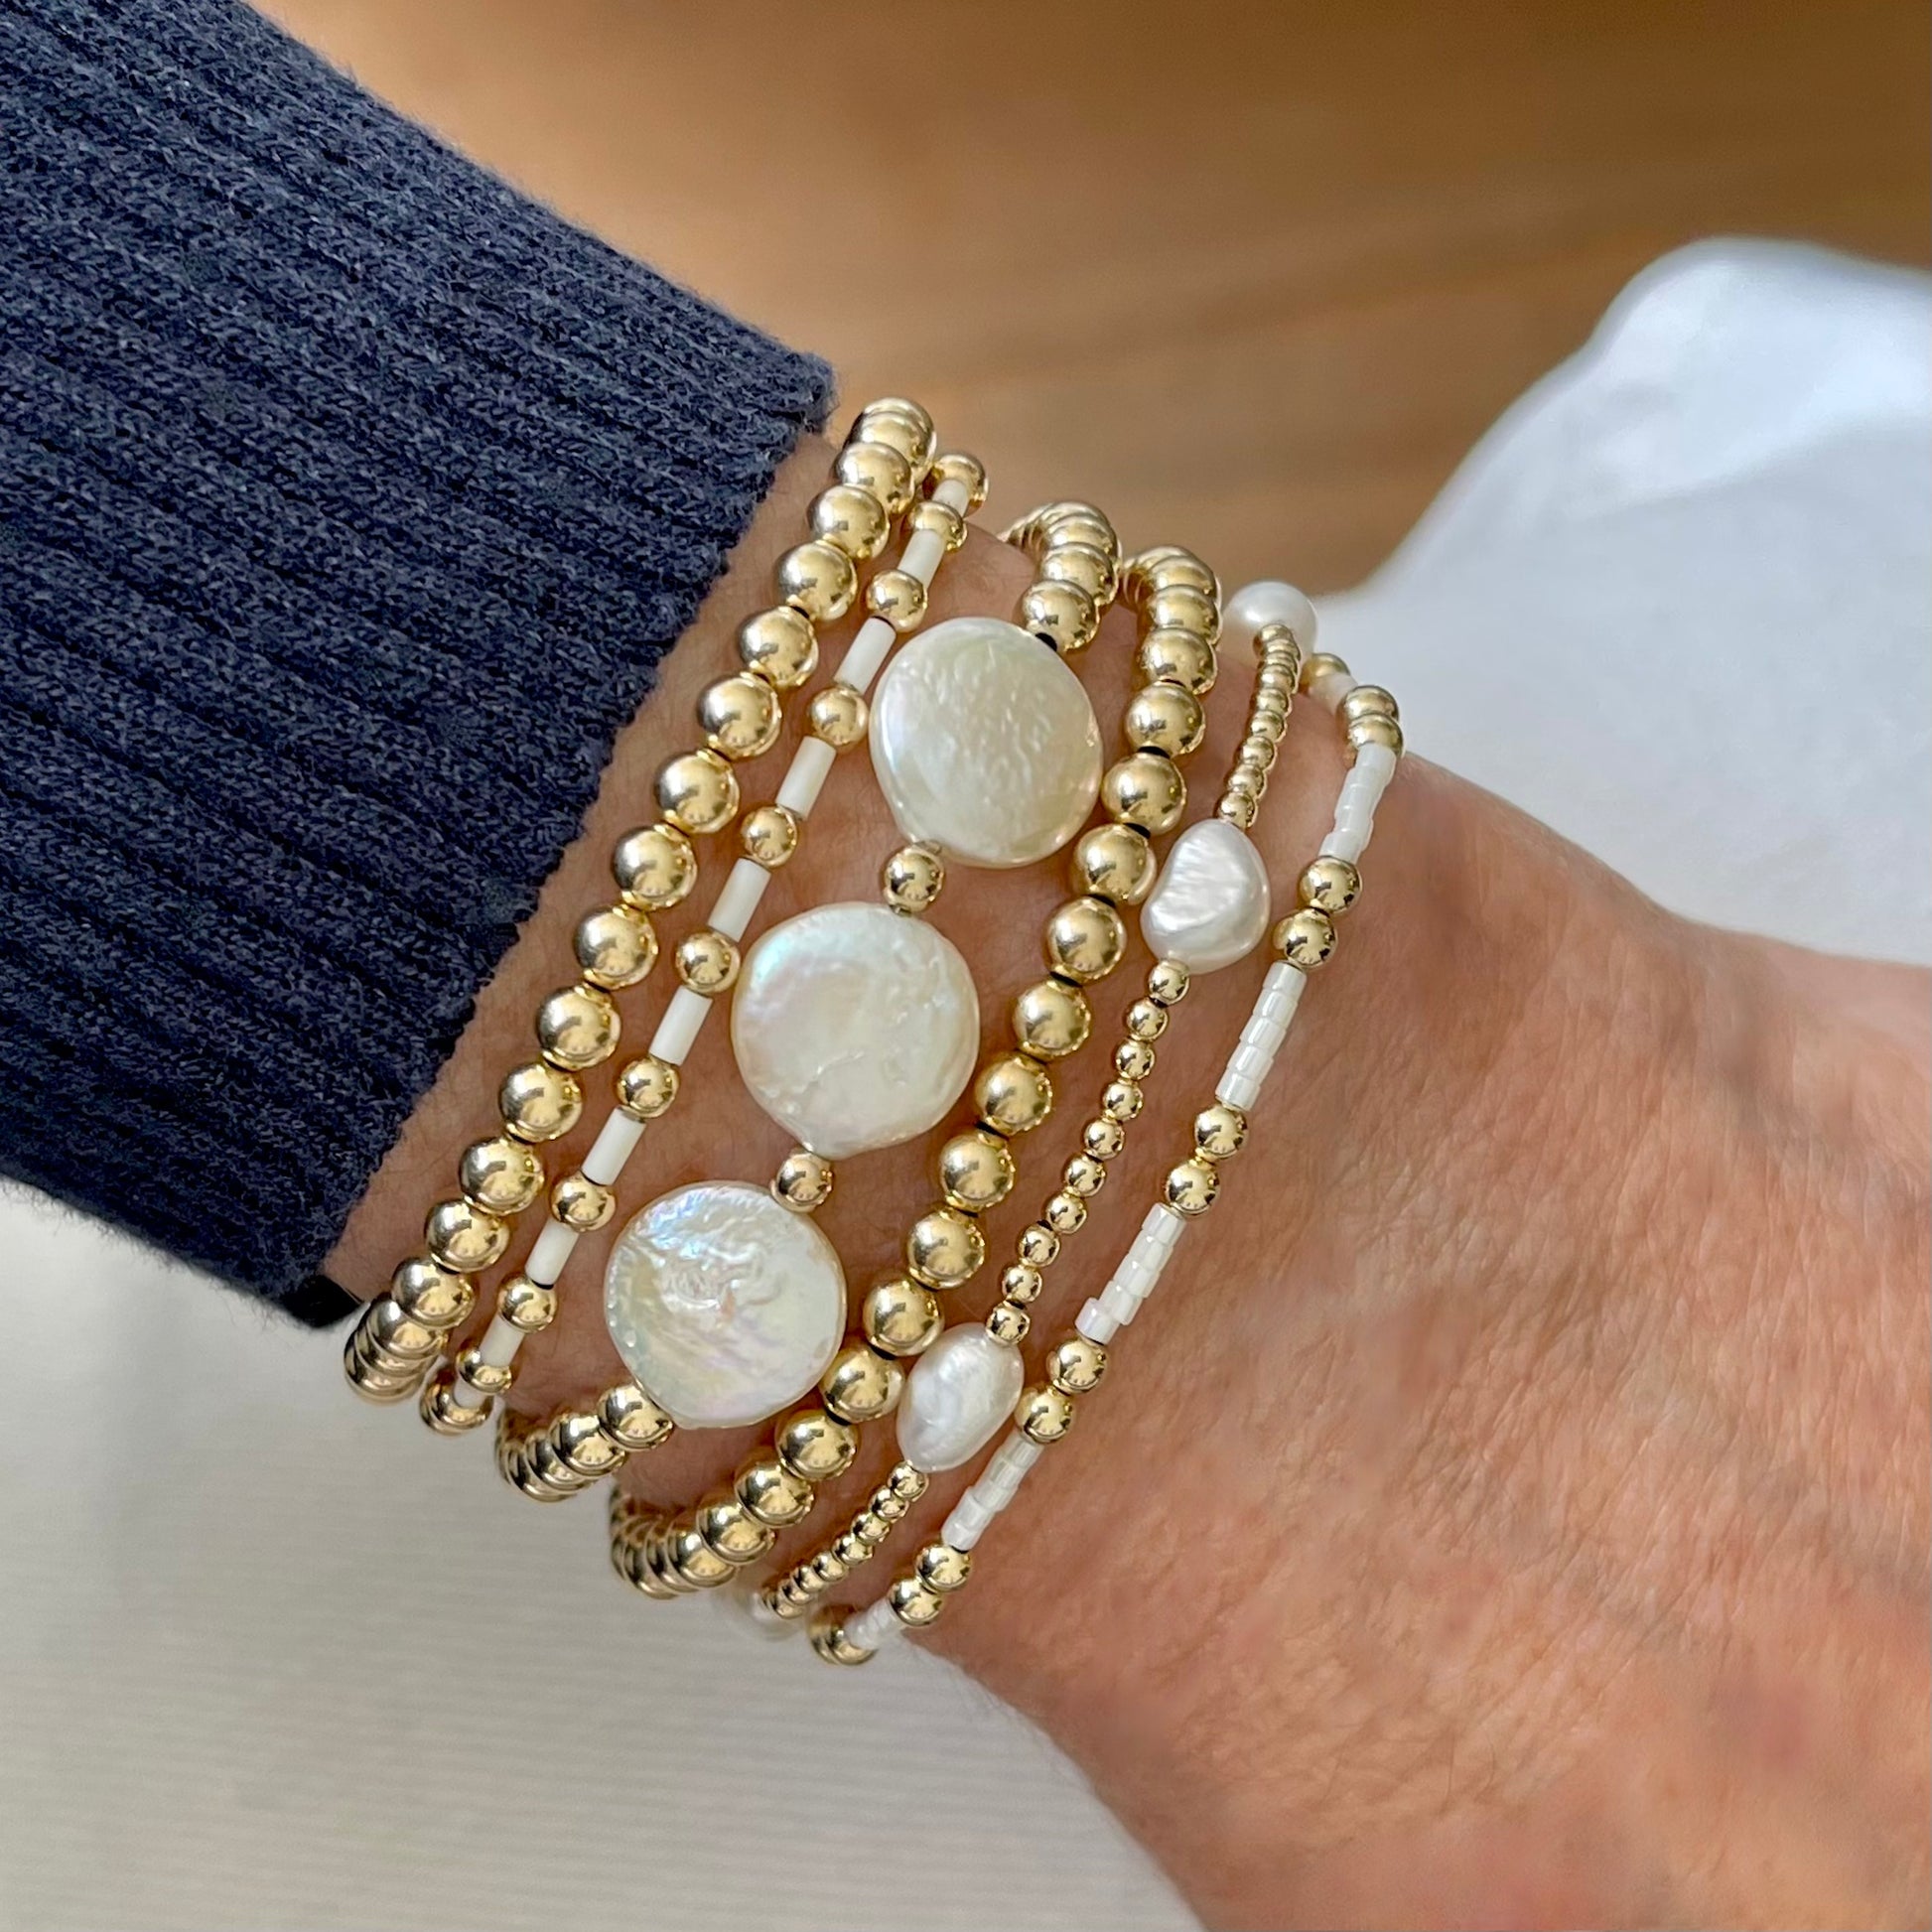 Stacked pearl bracelets with gold beads, freshwater rice and coin pearls, and white seed beads on stretch cord.